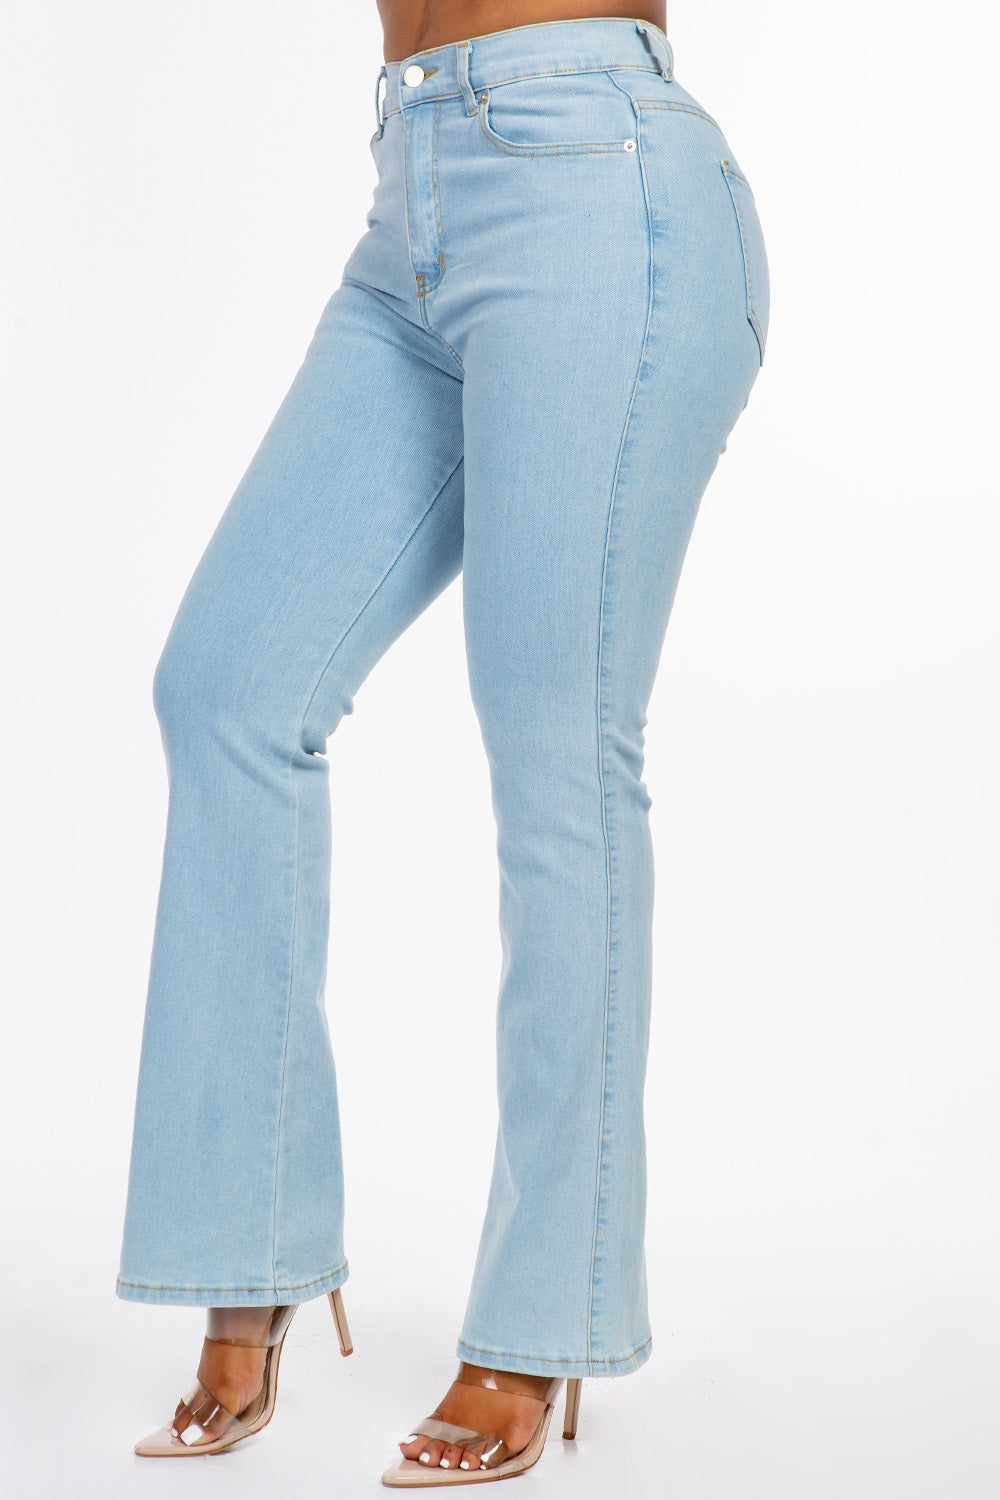 Extreme Stretch High Waist Bootcut Flare Jean Med YH2202